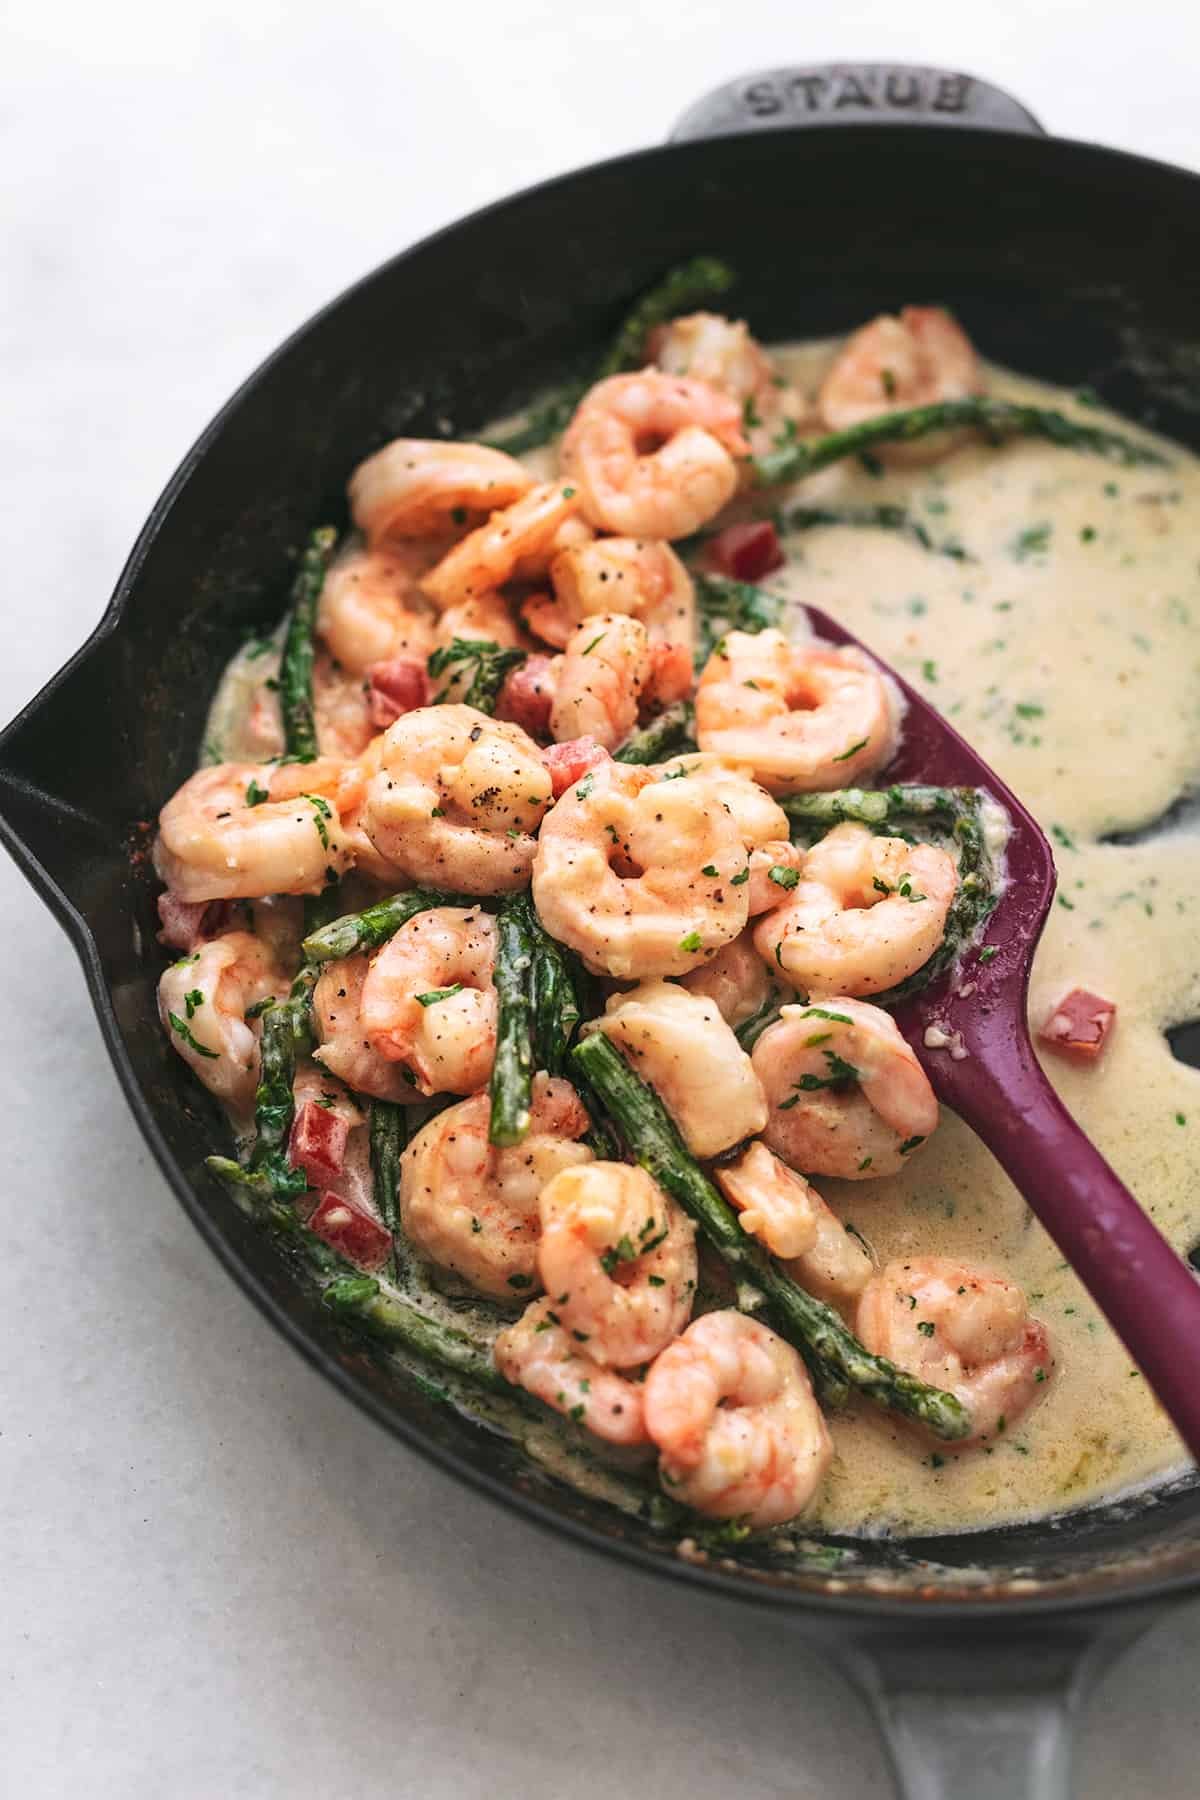 What Noodles To Use For Shrimp Scampi?